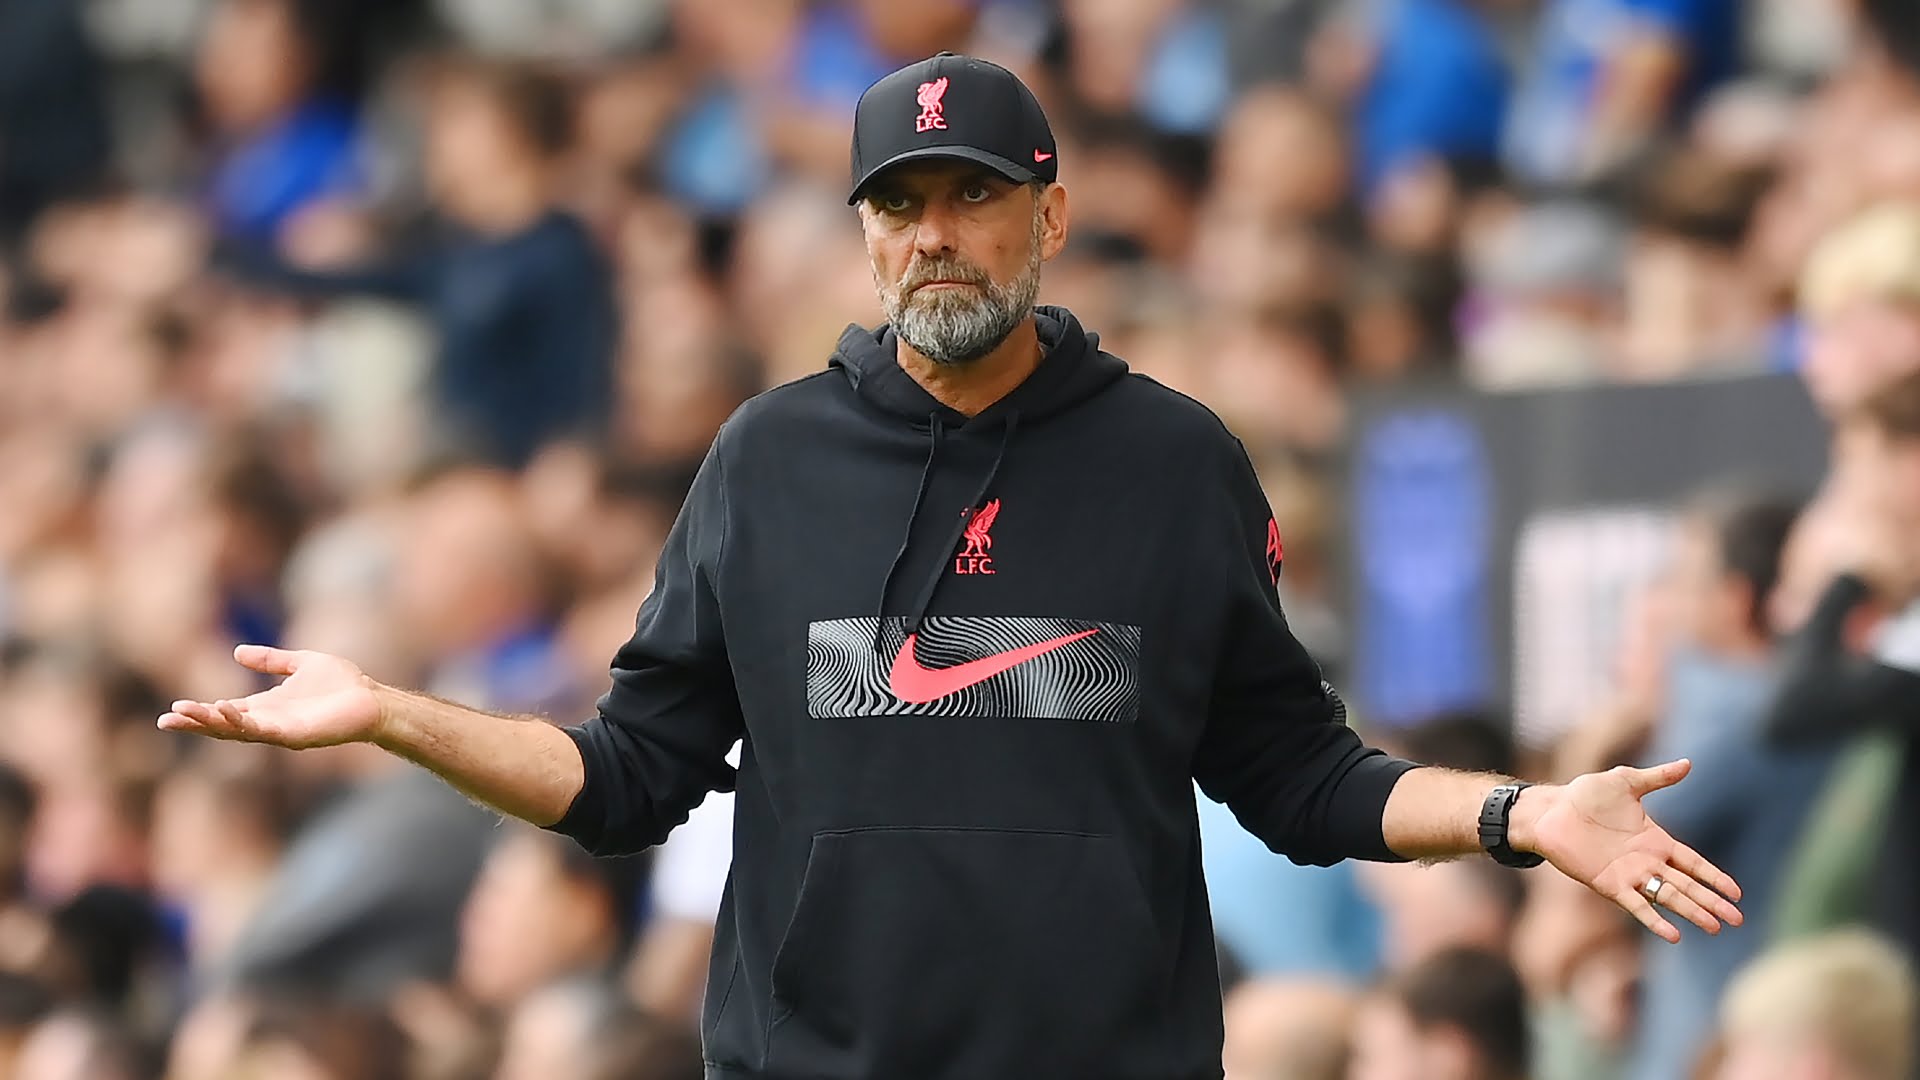 The Real Reason We Lost to Manchester City—Jurgen Klopp